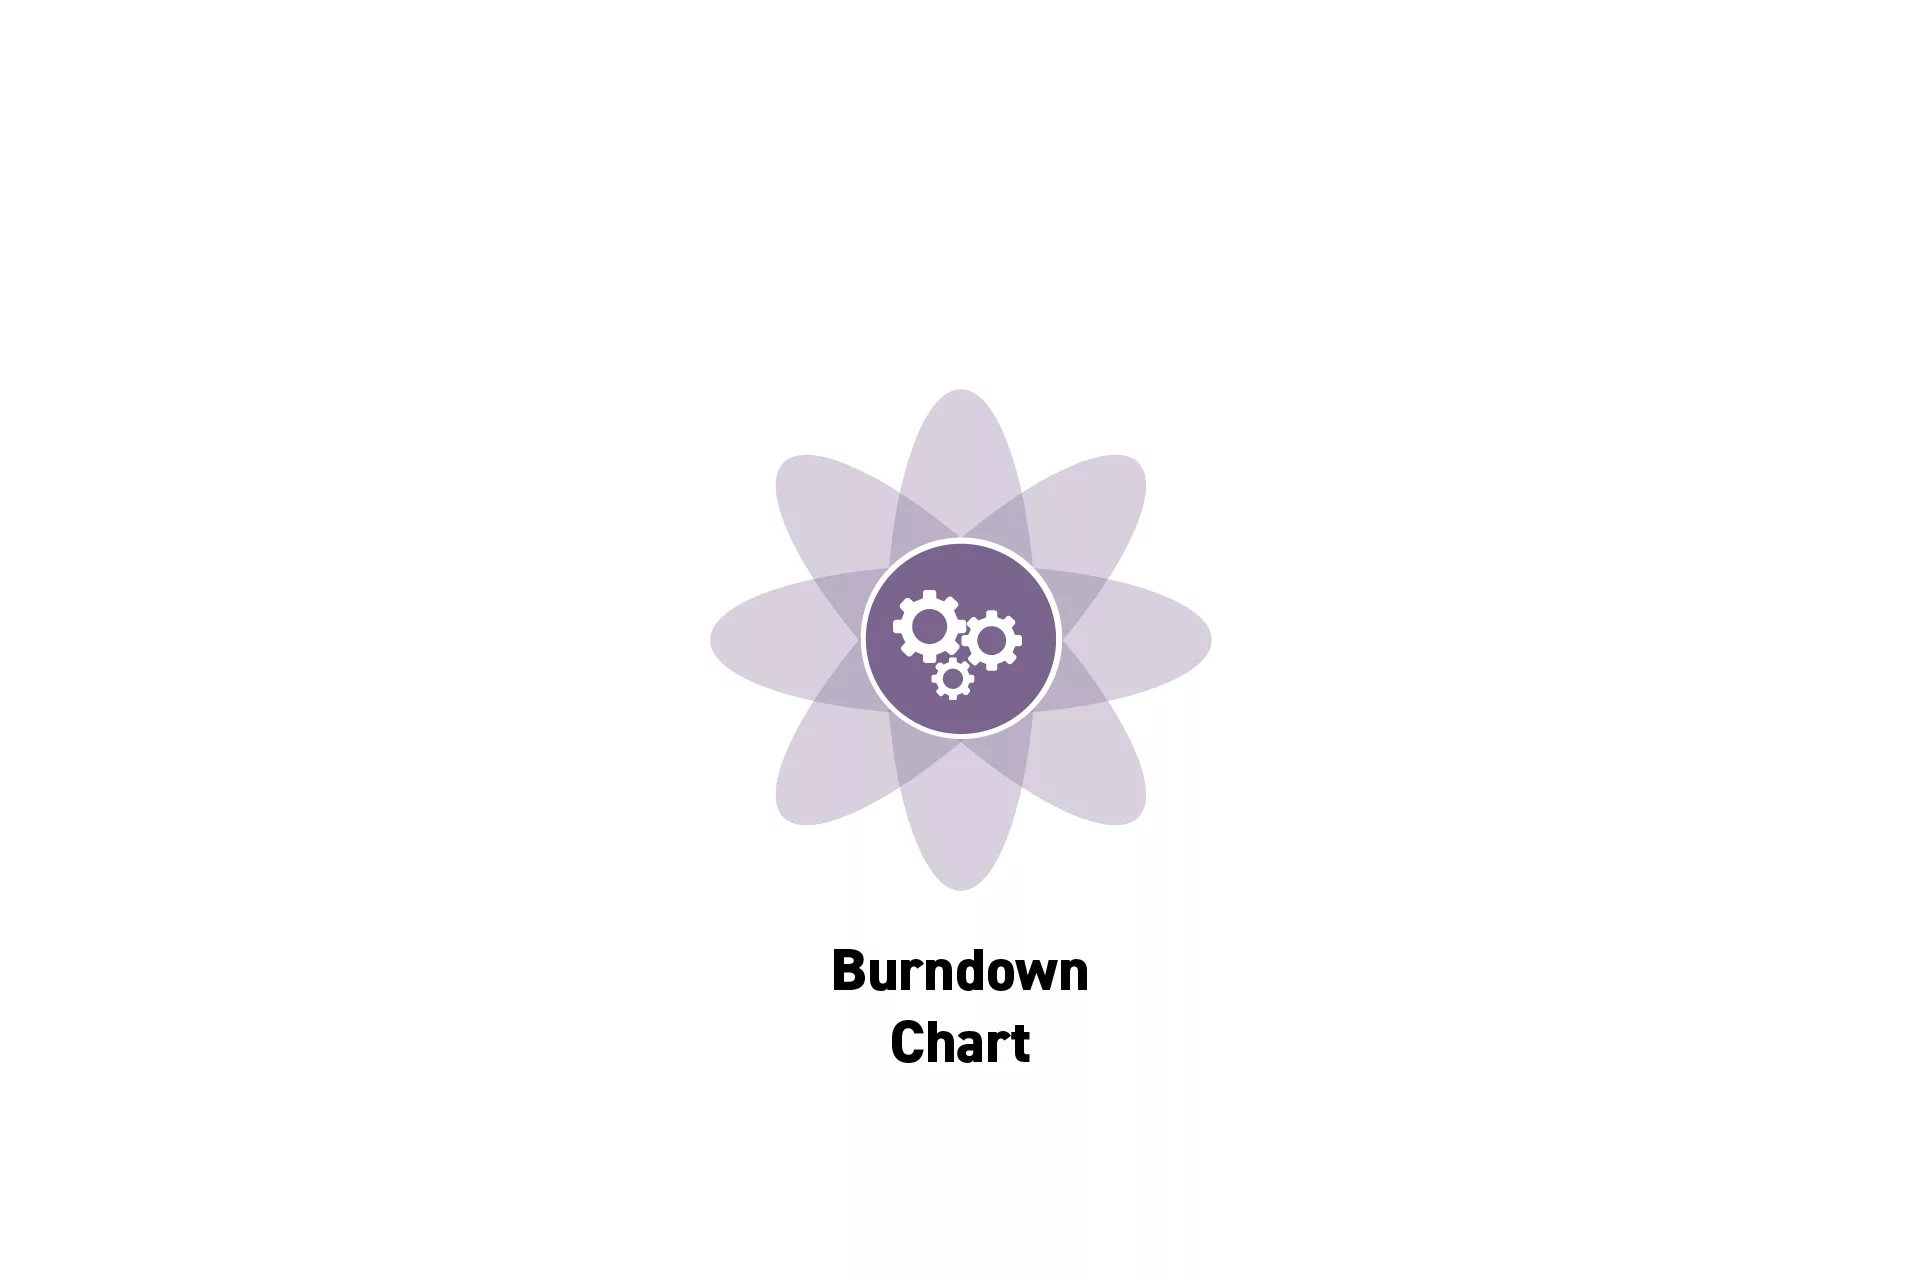 <p>A flower that represents Project Management with the text “Burndown Chart” beneath it.</p>